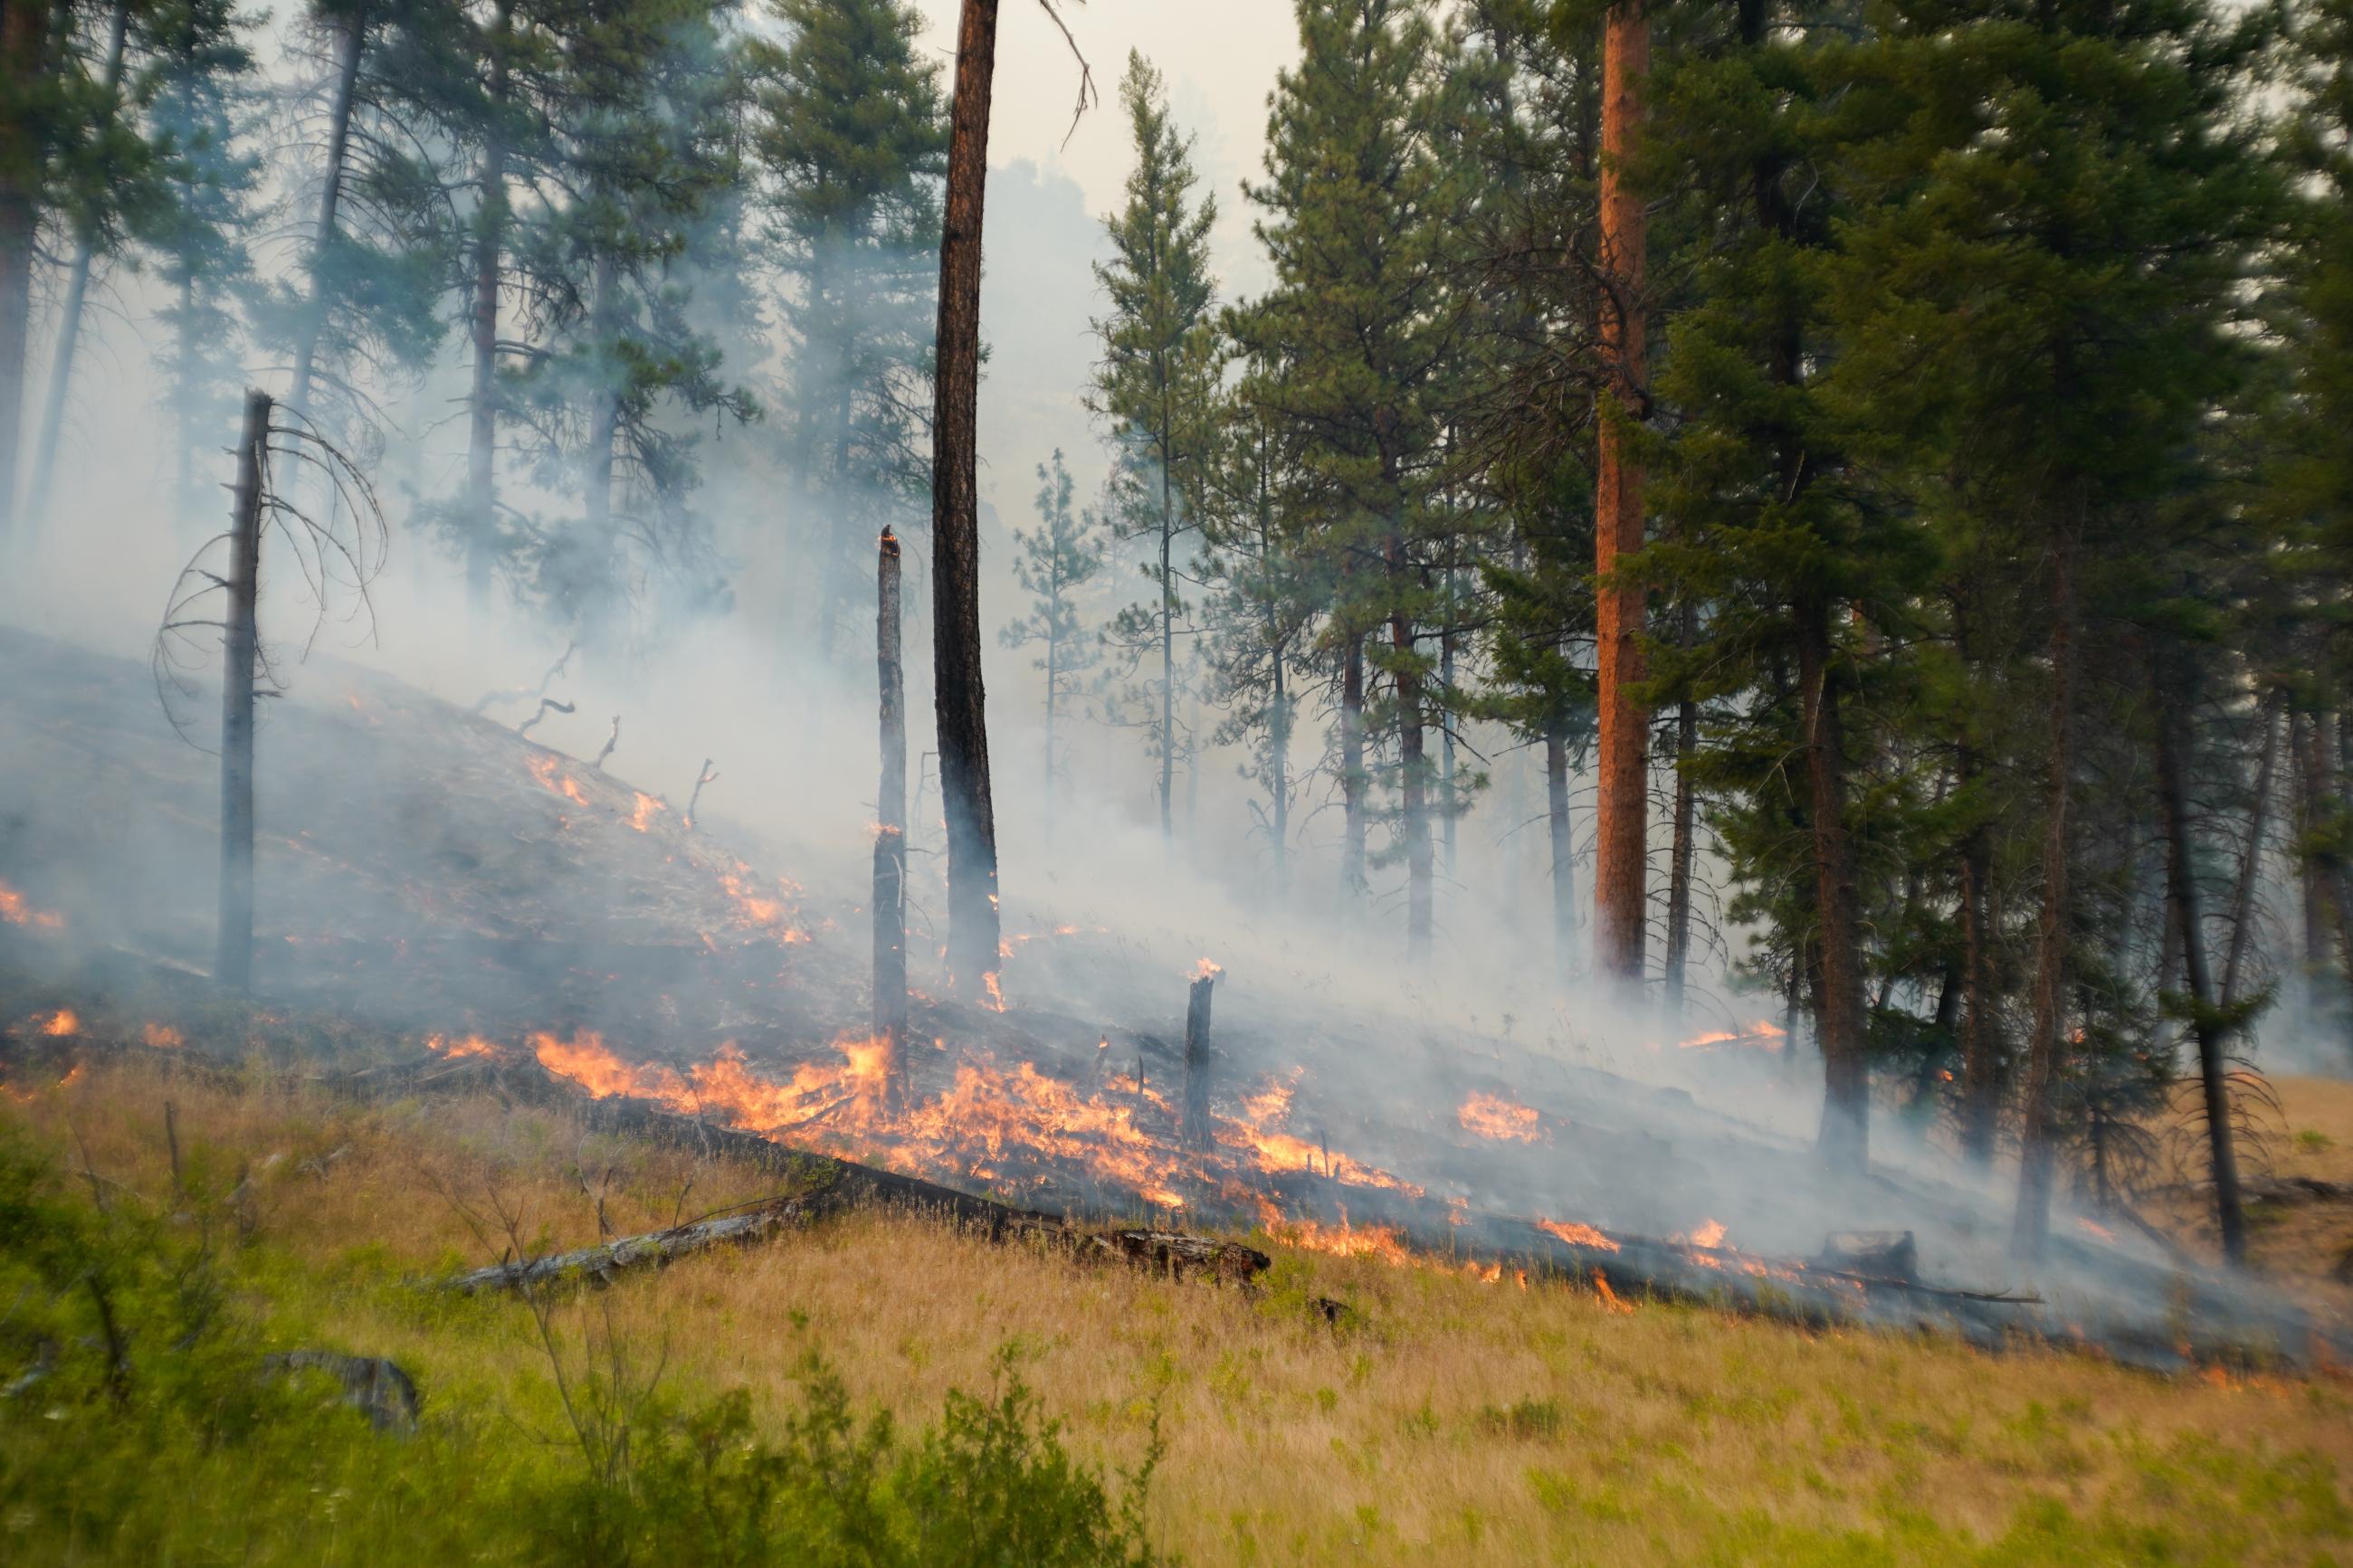 Image of fire creeping through grass and timber.